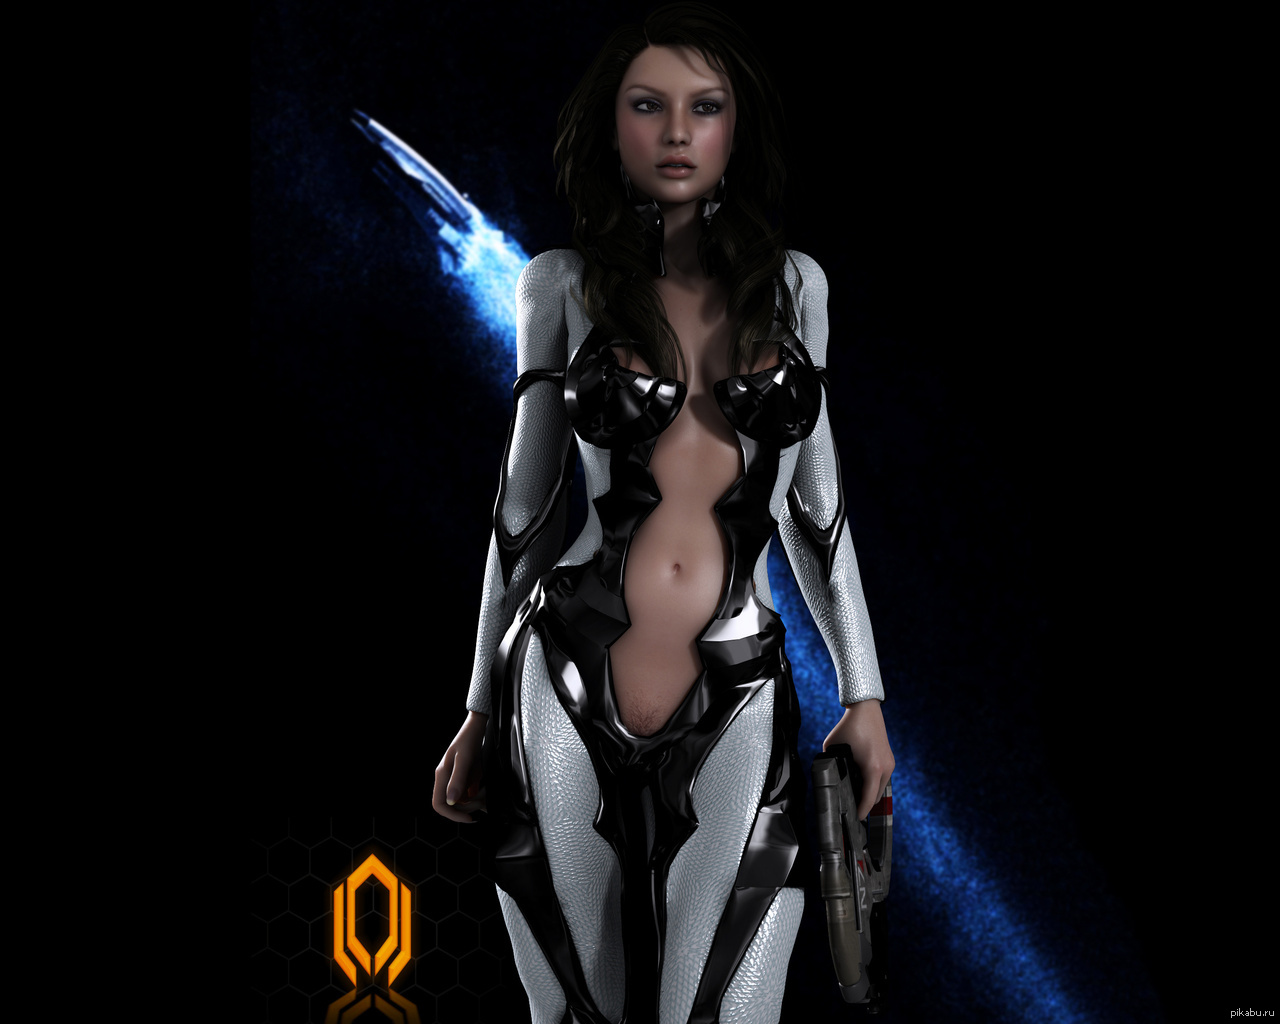 I don't know if this is a photo or not! - NSFW, Costume, Weapon, Miranda Lawson, Mass effect, Cerberus